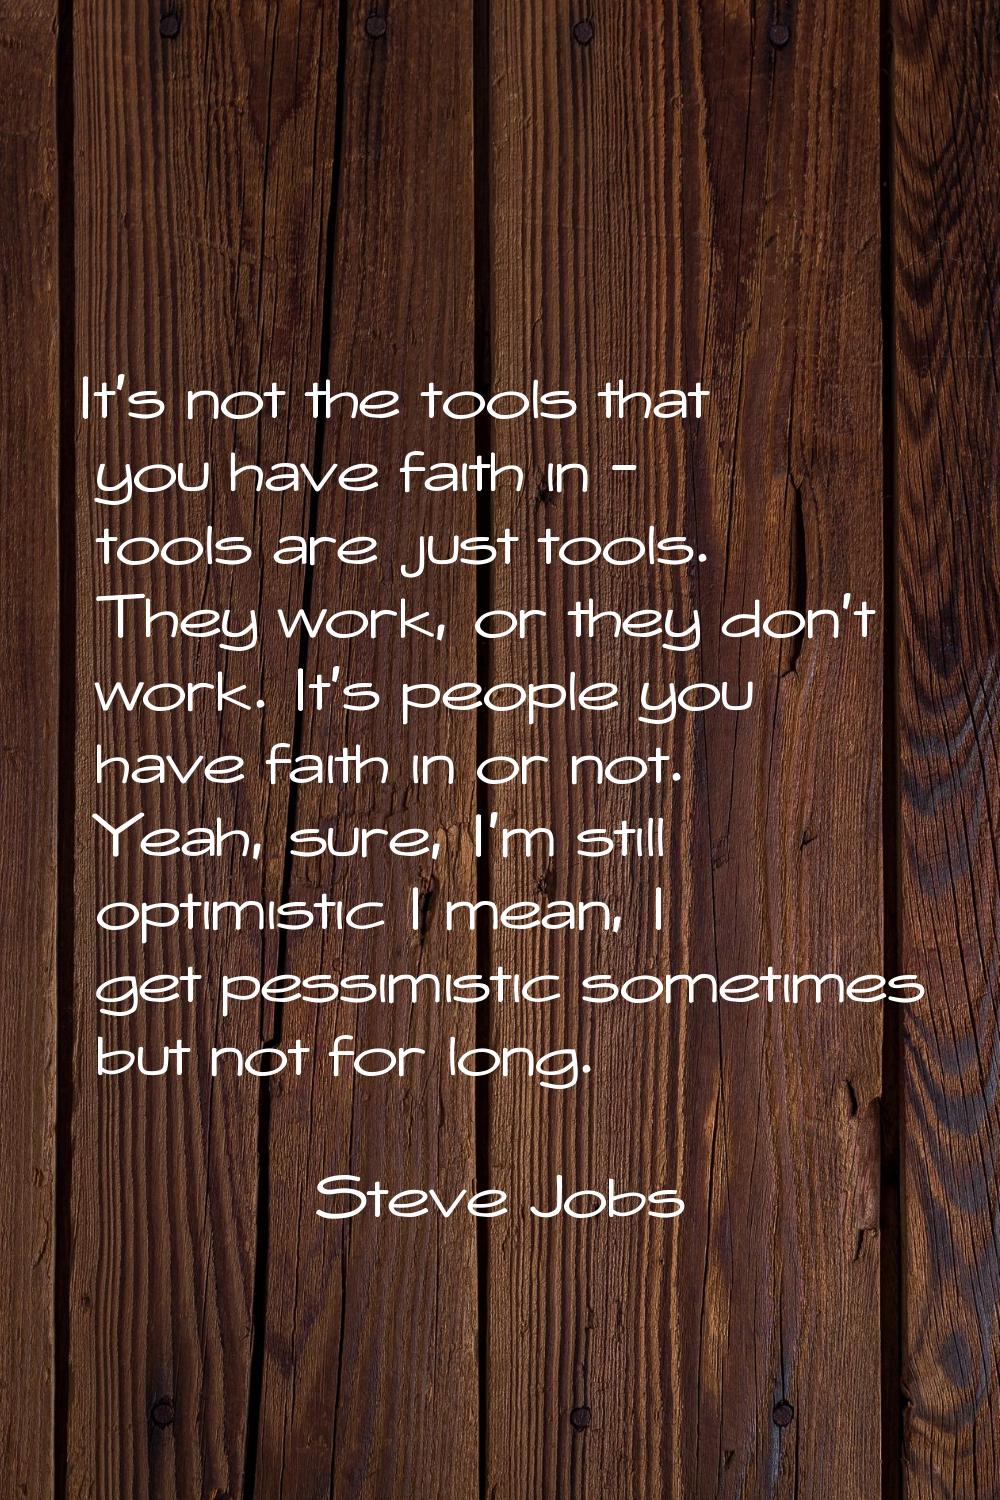 It's not the tools that you have faith in - tools are just tools. They work, or they don't work. It